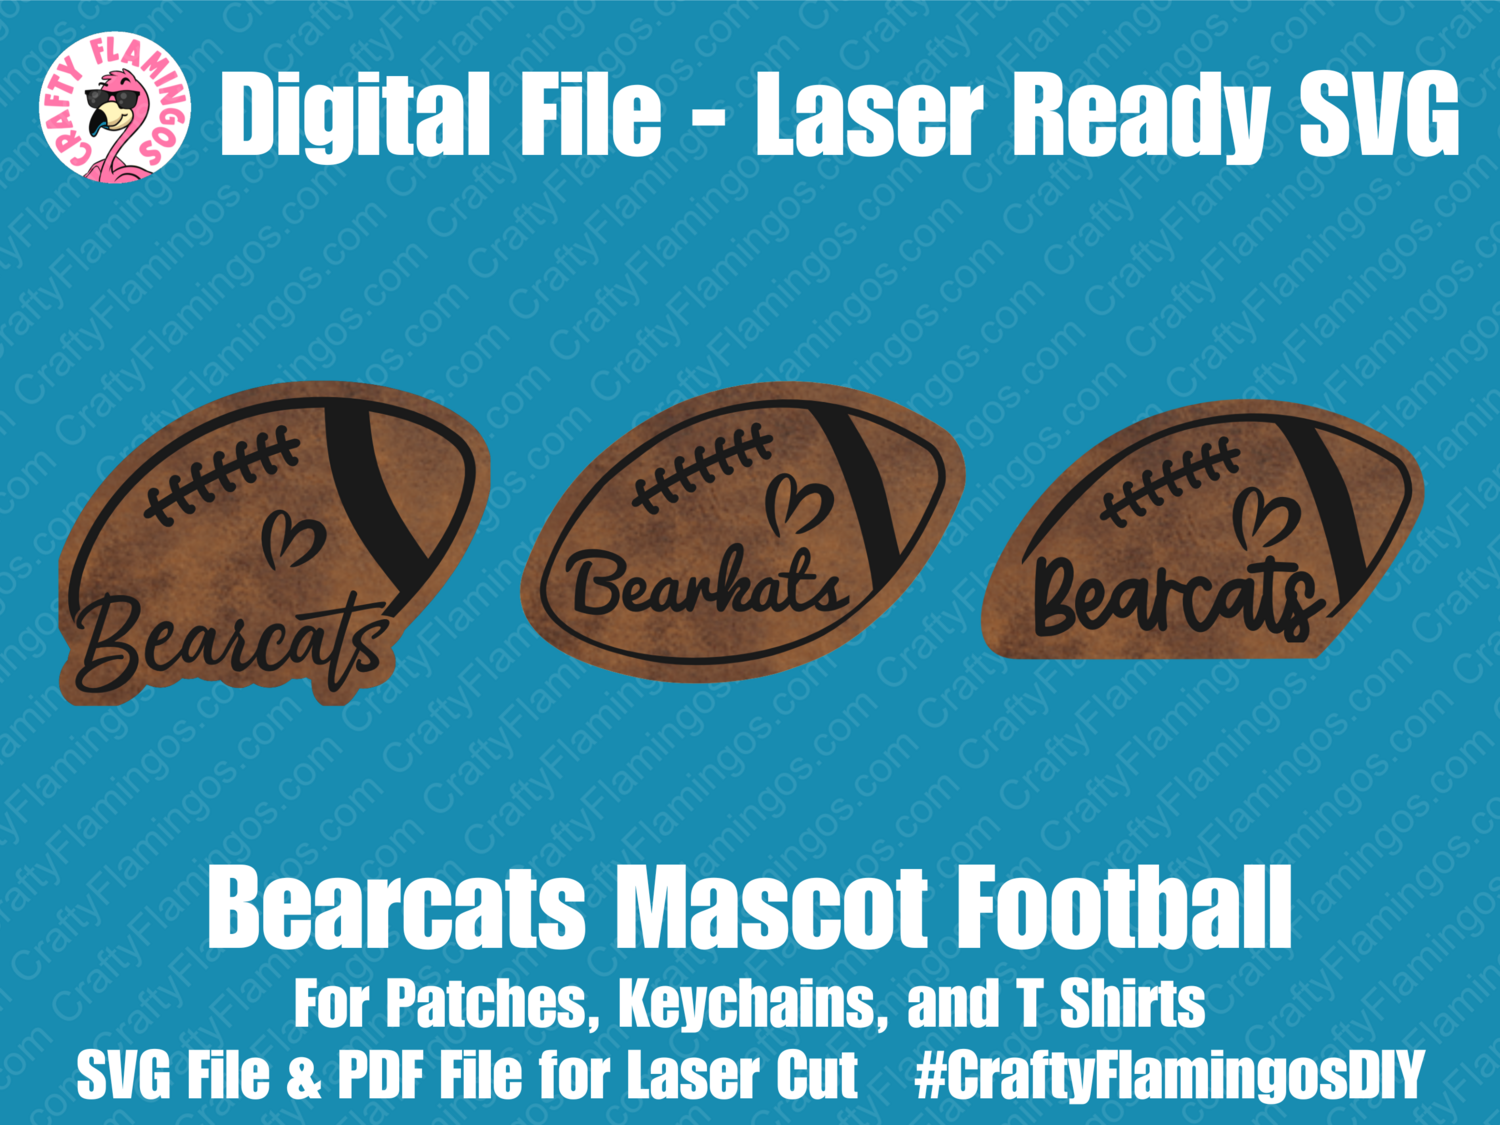 Bearcats Football Patch - 3 styles - Patches, Keychain, & Tees - SVG Laser Glowforge Cut File Digital Download PDF